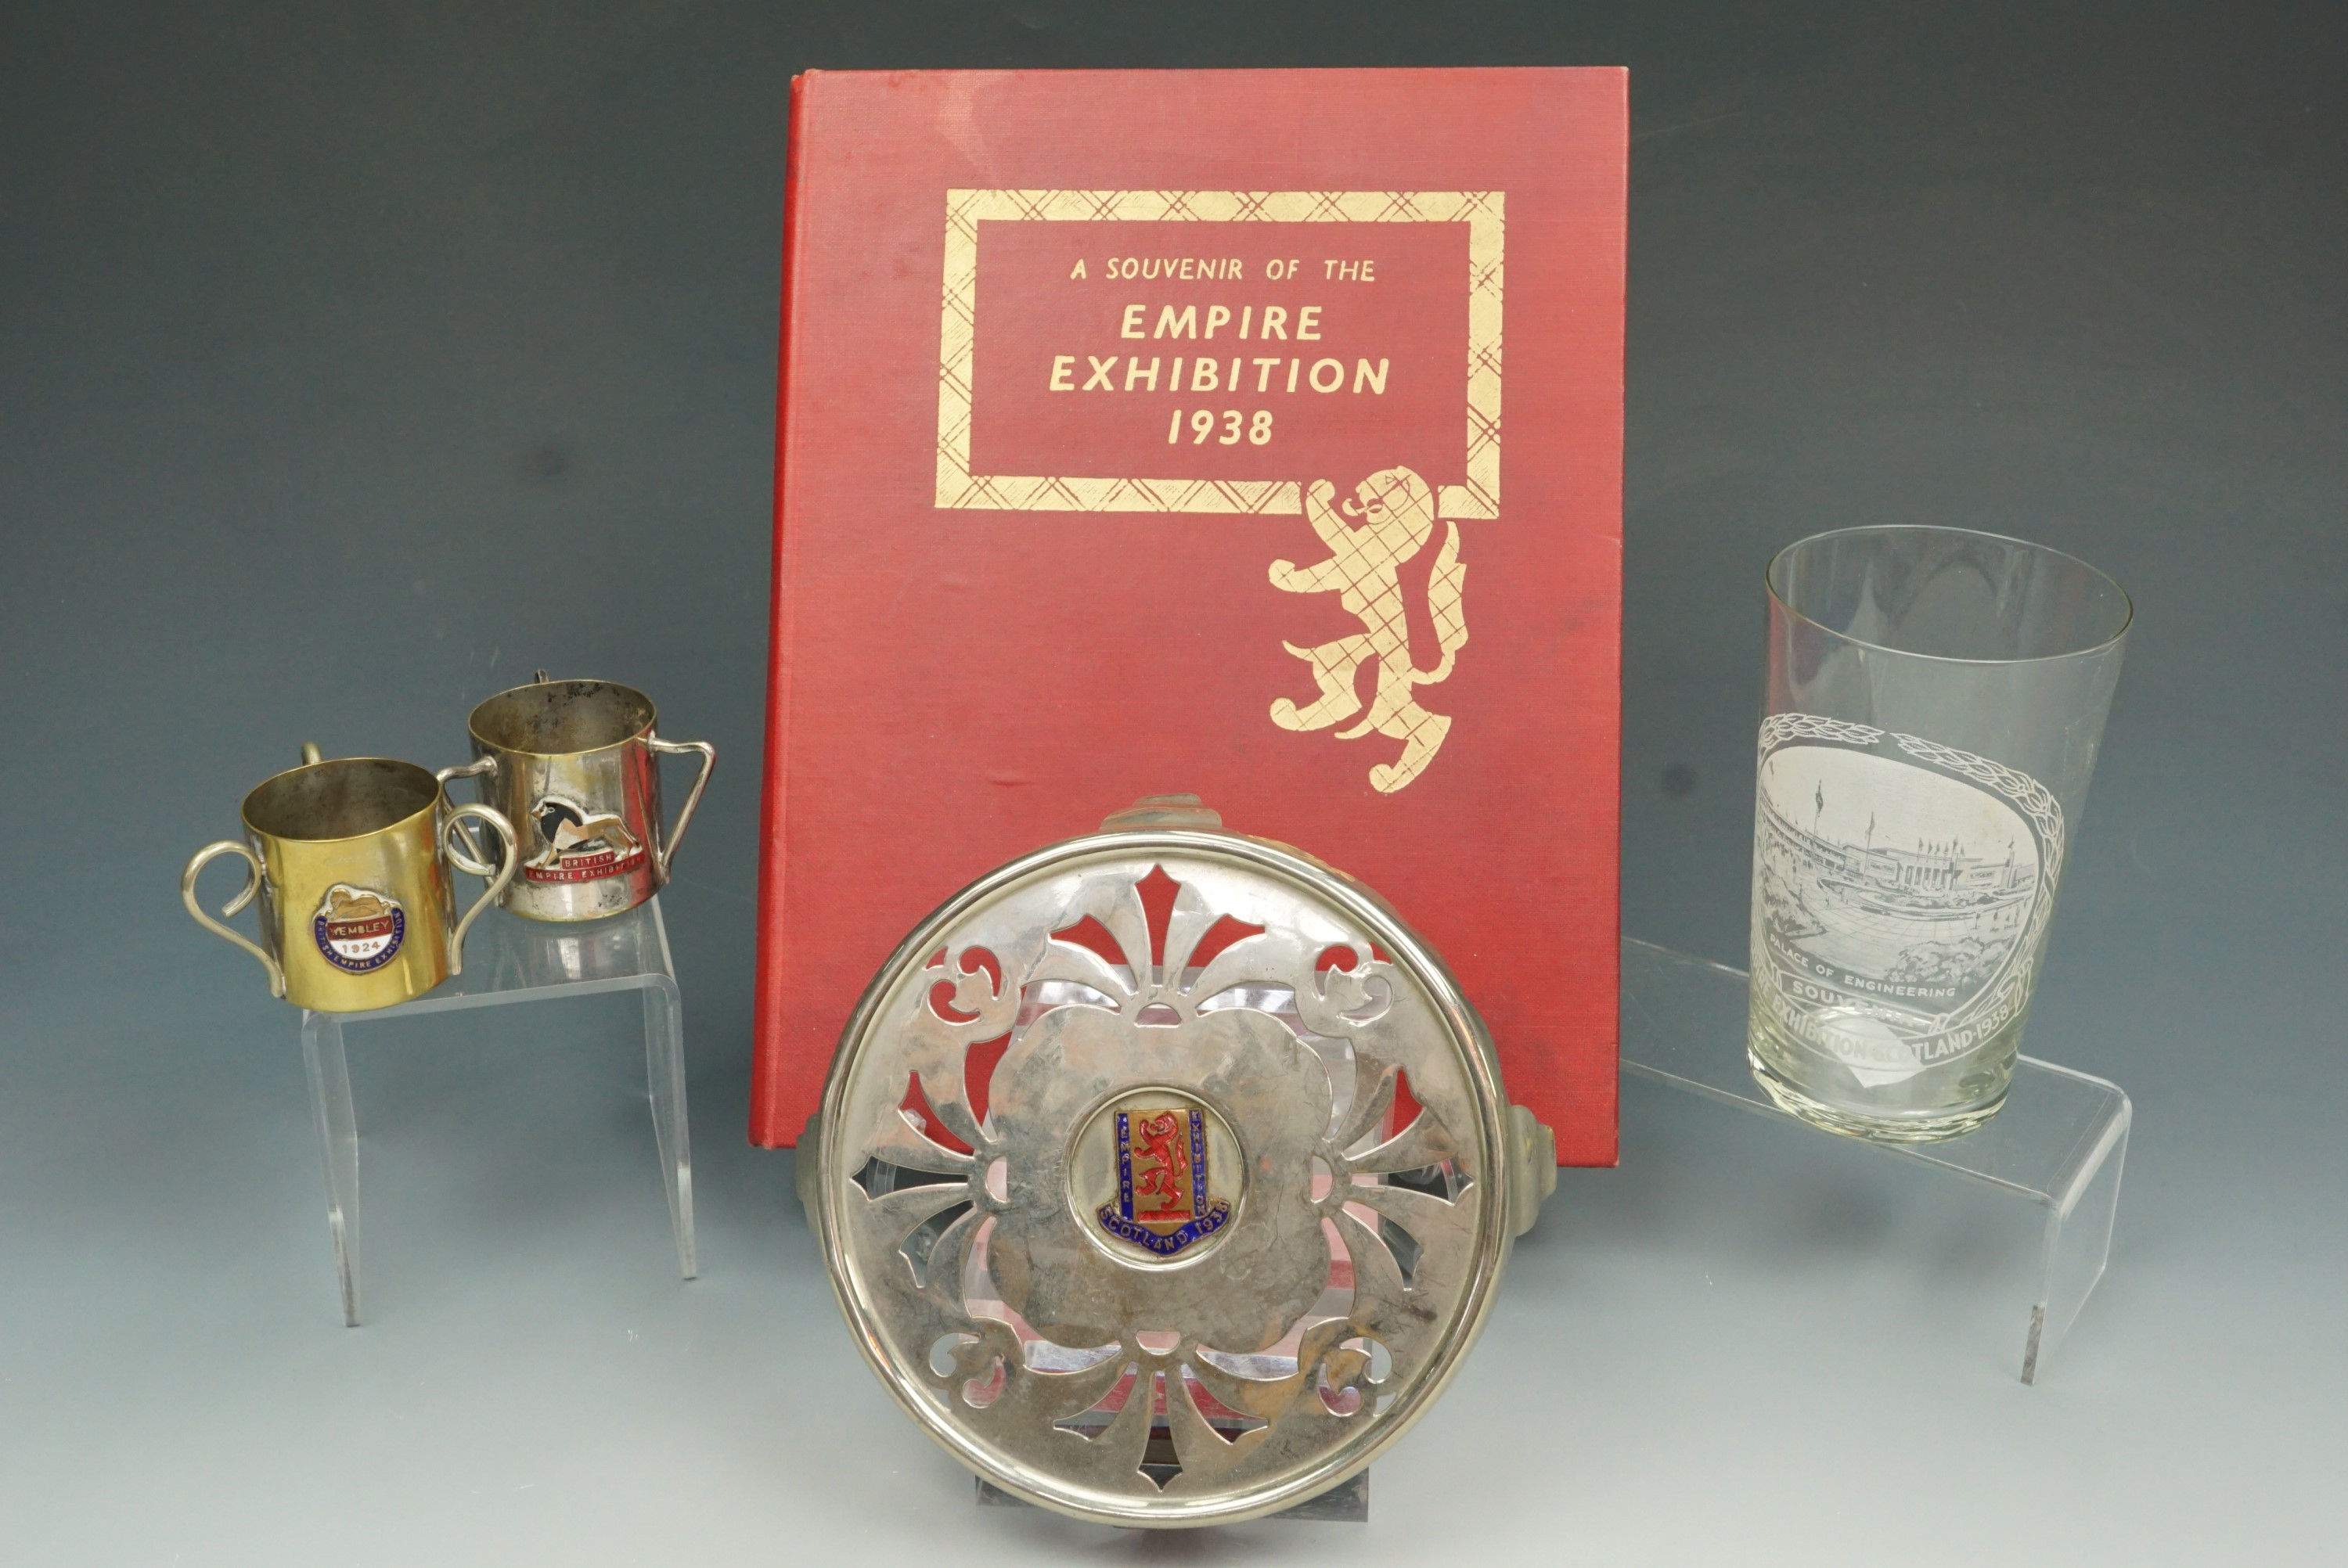 A group of 'Empire Exhibition 1938' commemoratives comprising of a book, an enameled whiskey